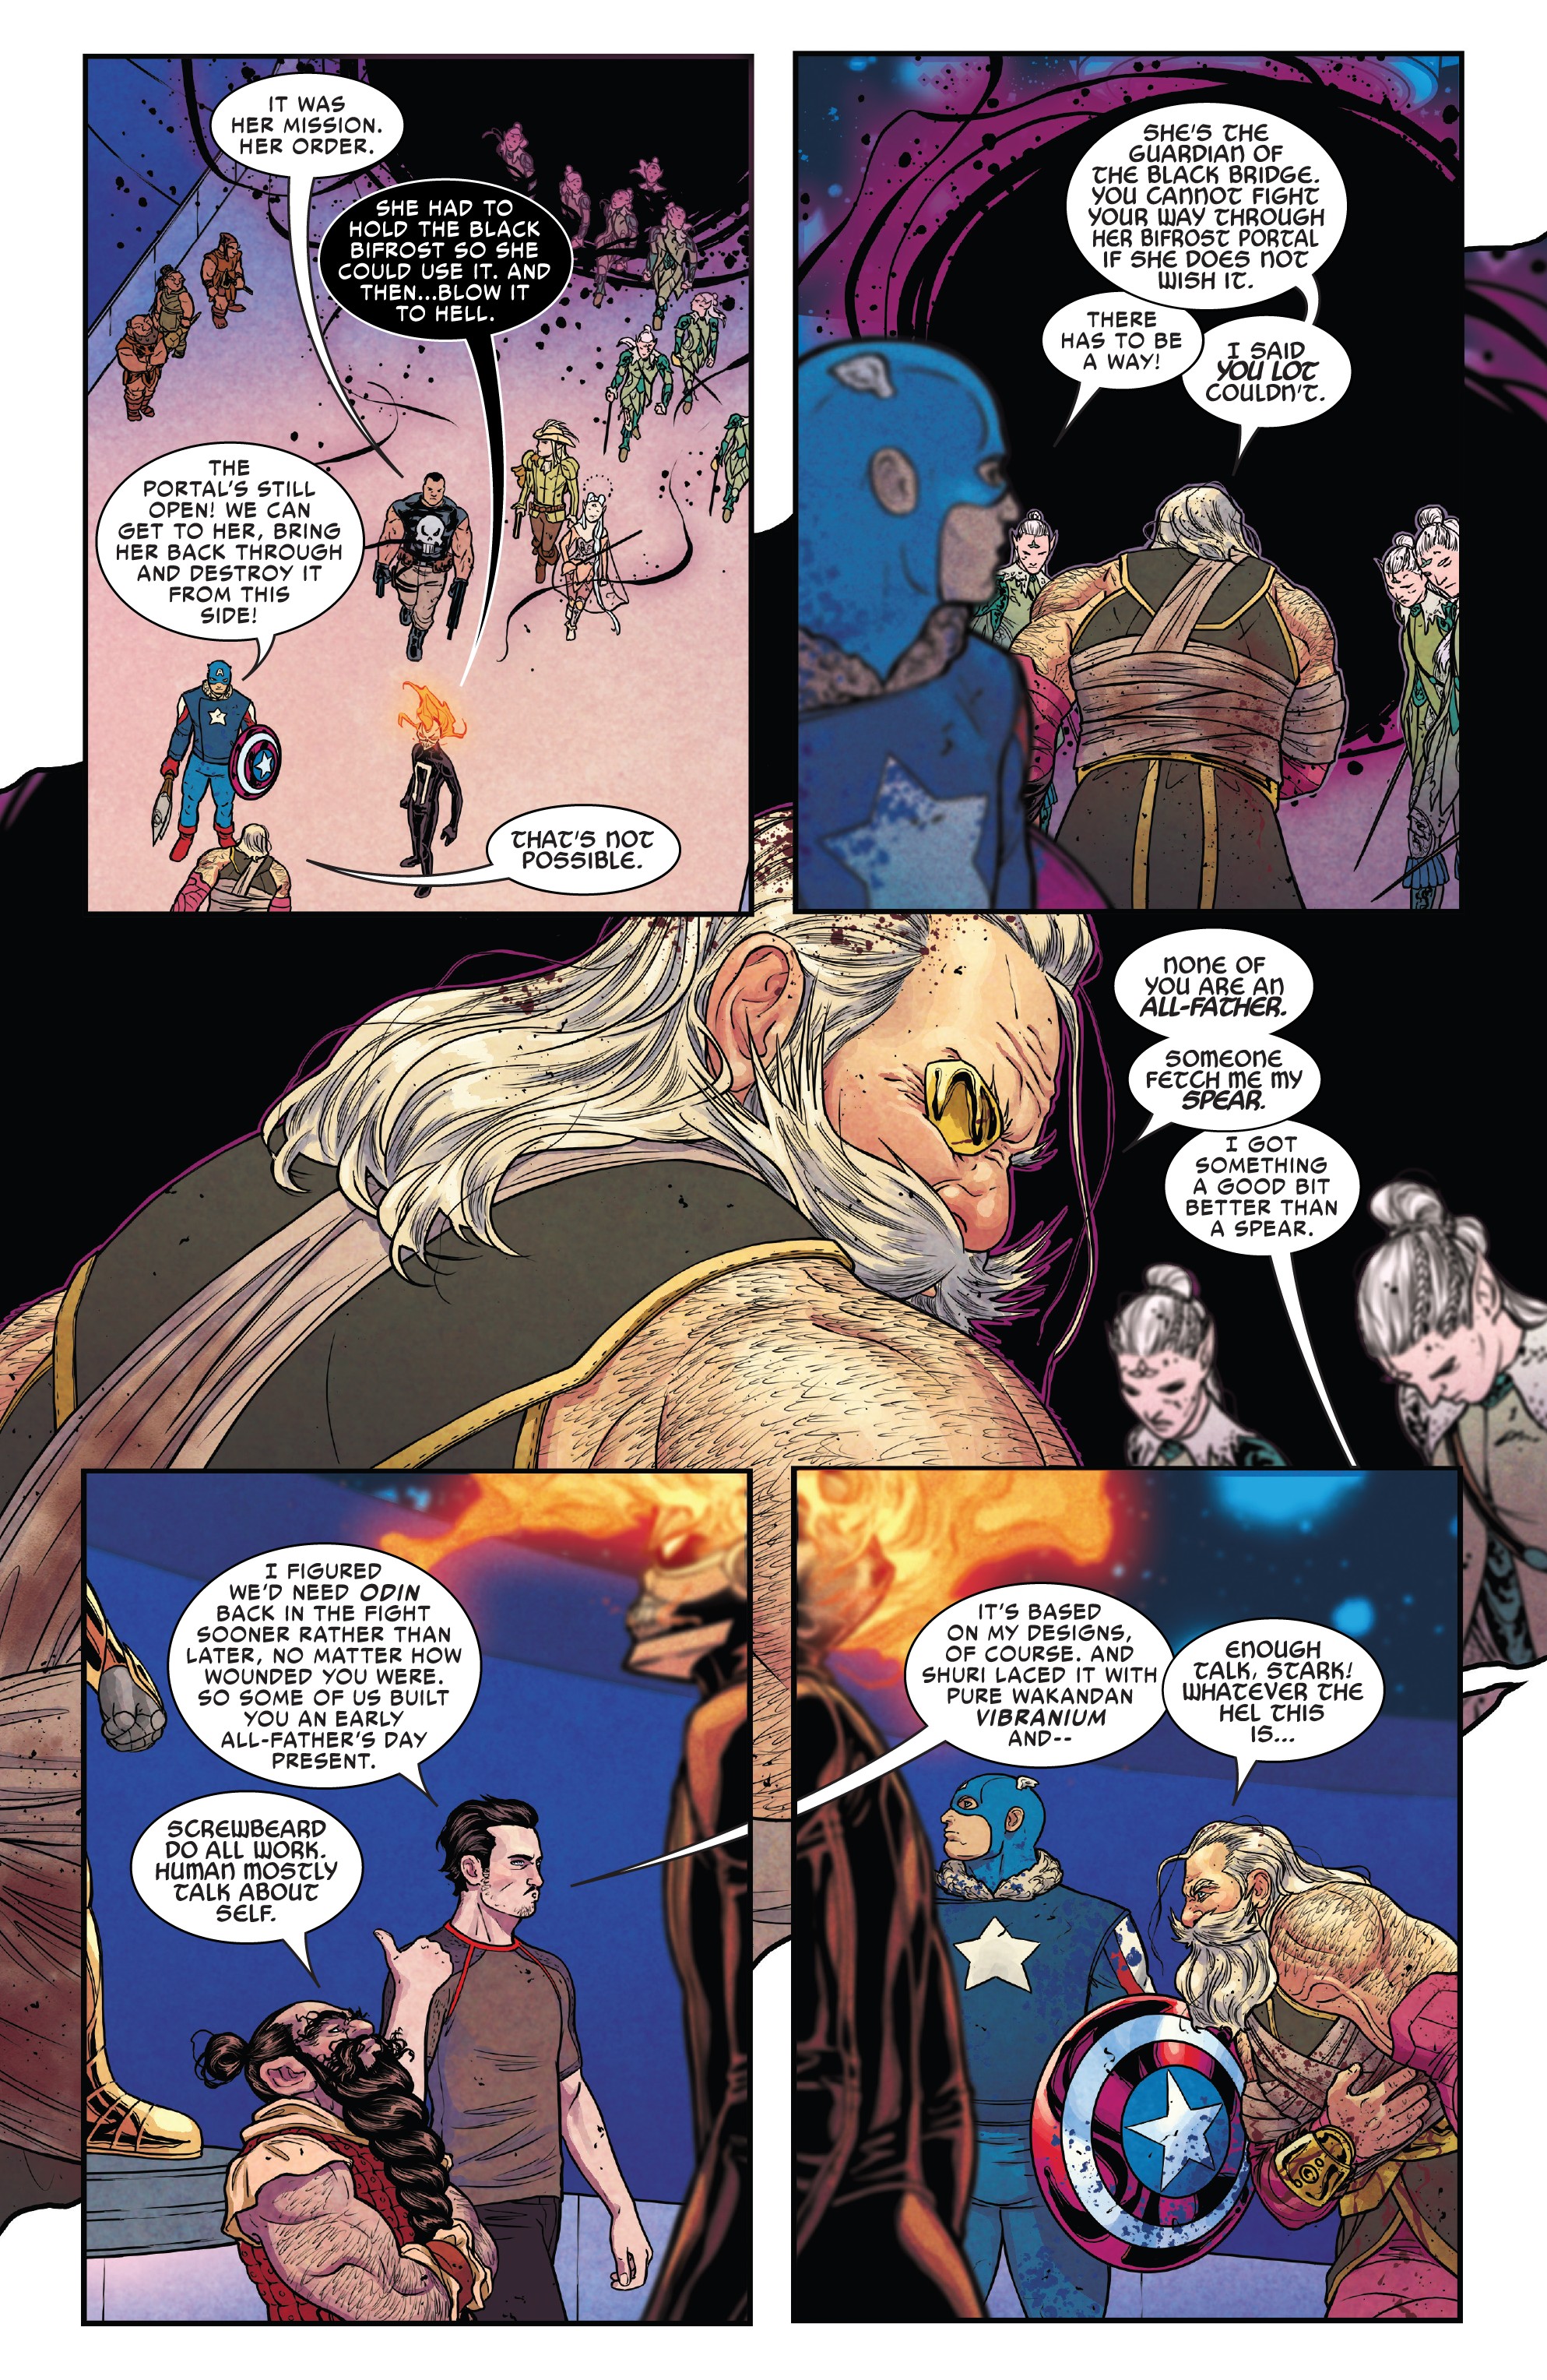 War Of The Realms 04 of 06 015